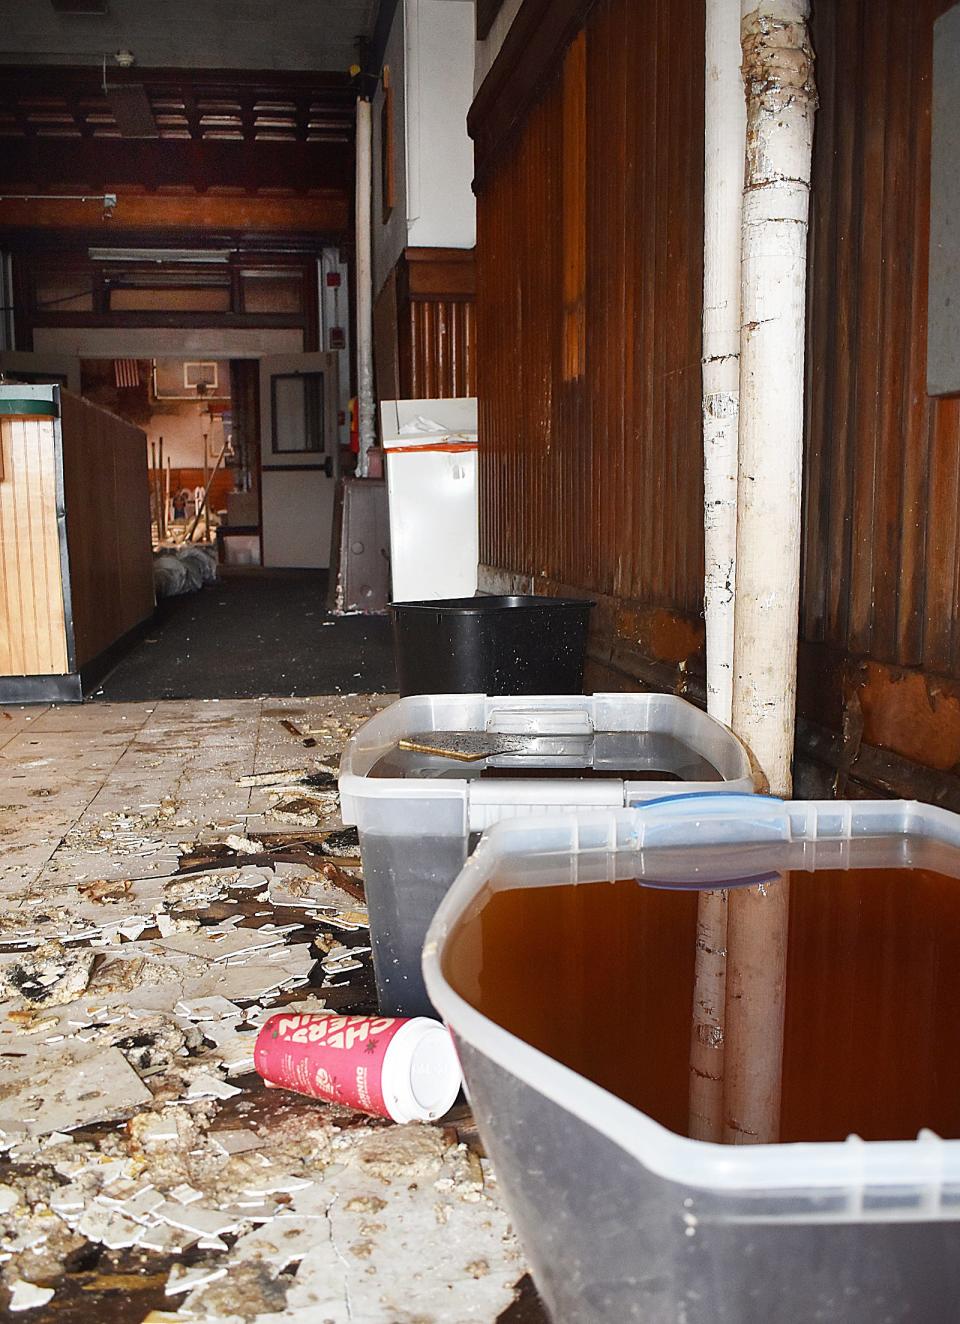 The Bank Street Armory, on Bank Street in Fall River, is in rough condition, with trash, debris and bins of water.